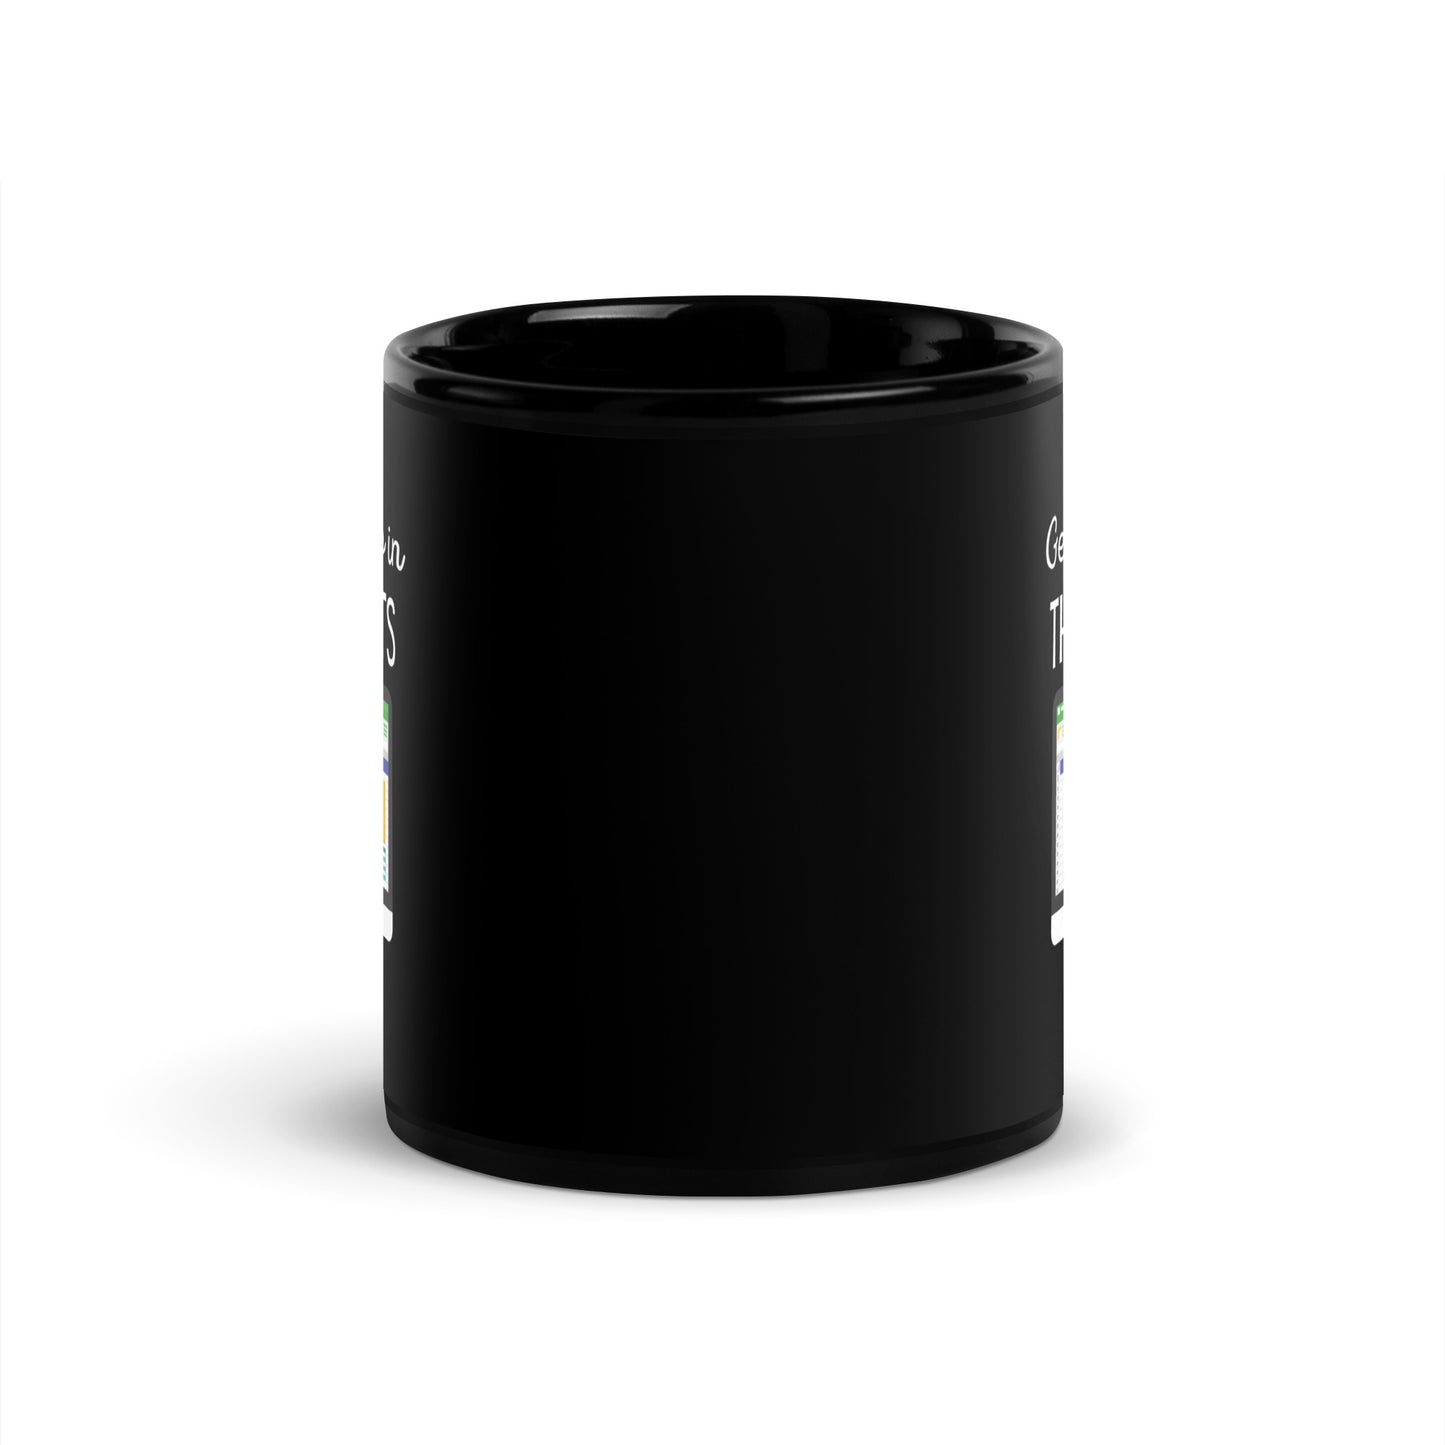 Up in These Sheets Black Glossy Mug 11oz